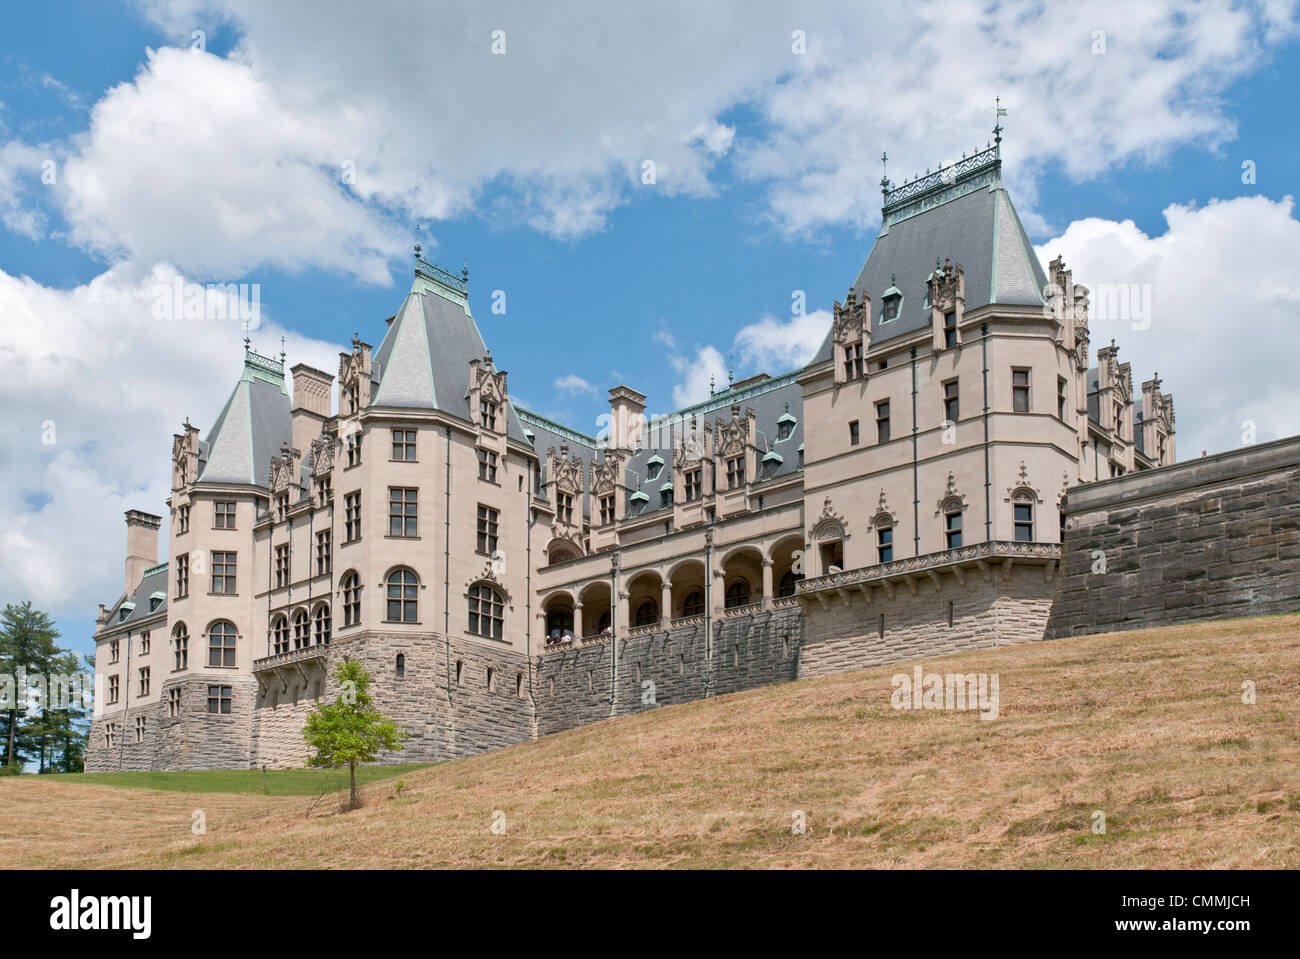 North Carolina, Asheville, Biltmore House & Gardens, George W. Vanderbilt's 250-room French chateau completed in 1895. Stock Photo